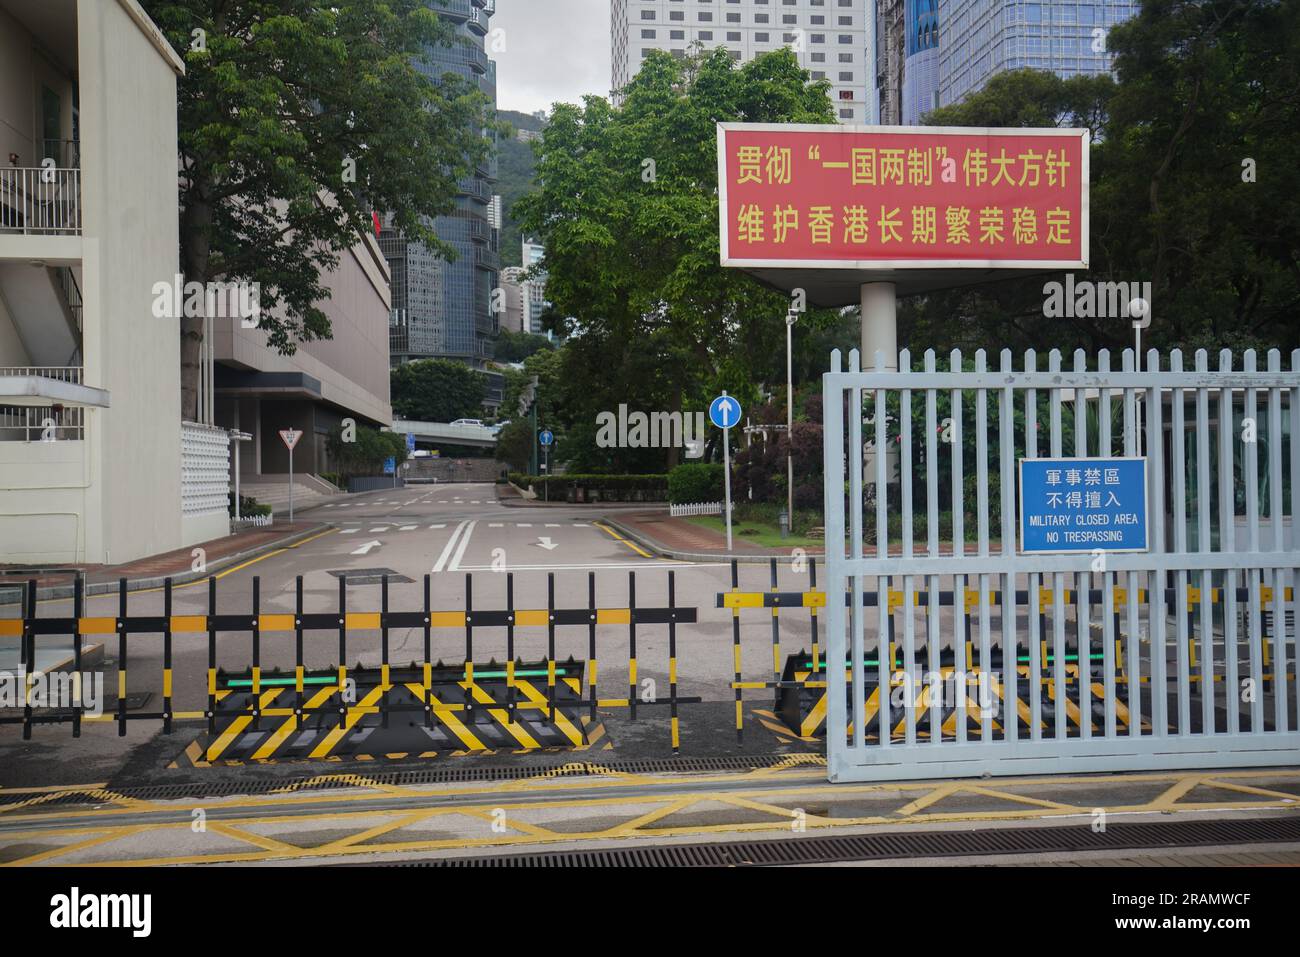 Entrance gate to the Chinese People's Liberation Army Forces Hong Kong Building in Hong Kong. The Central Barracks Amethyst Block is one of the barracks of Chinese People's Liberation Army basement, it is located next to the Central Government Offices. Stock Photo